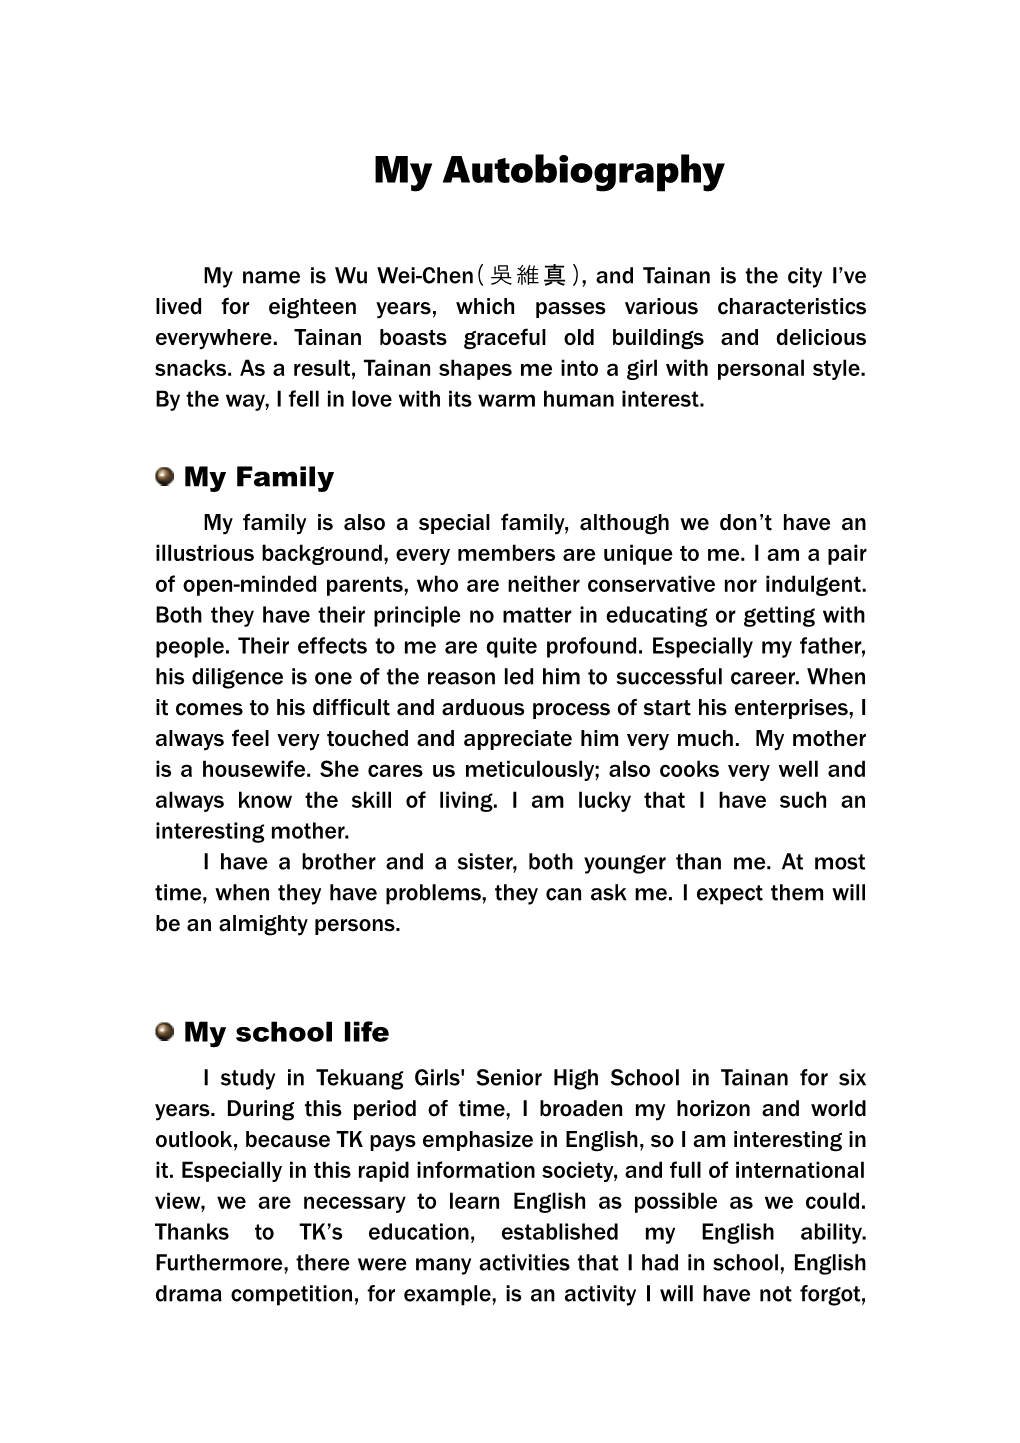 My Name Is Wu Wei-Chen(吳維真), and Tainan Is the City I Ve Lived for Eighteen Years, Whichpasses